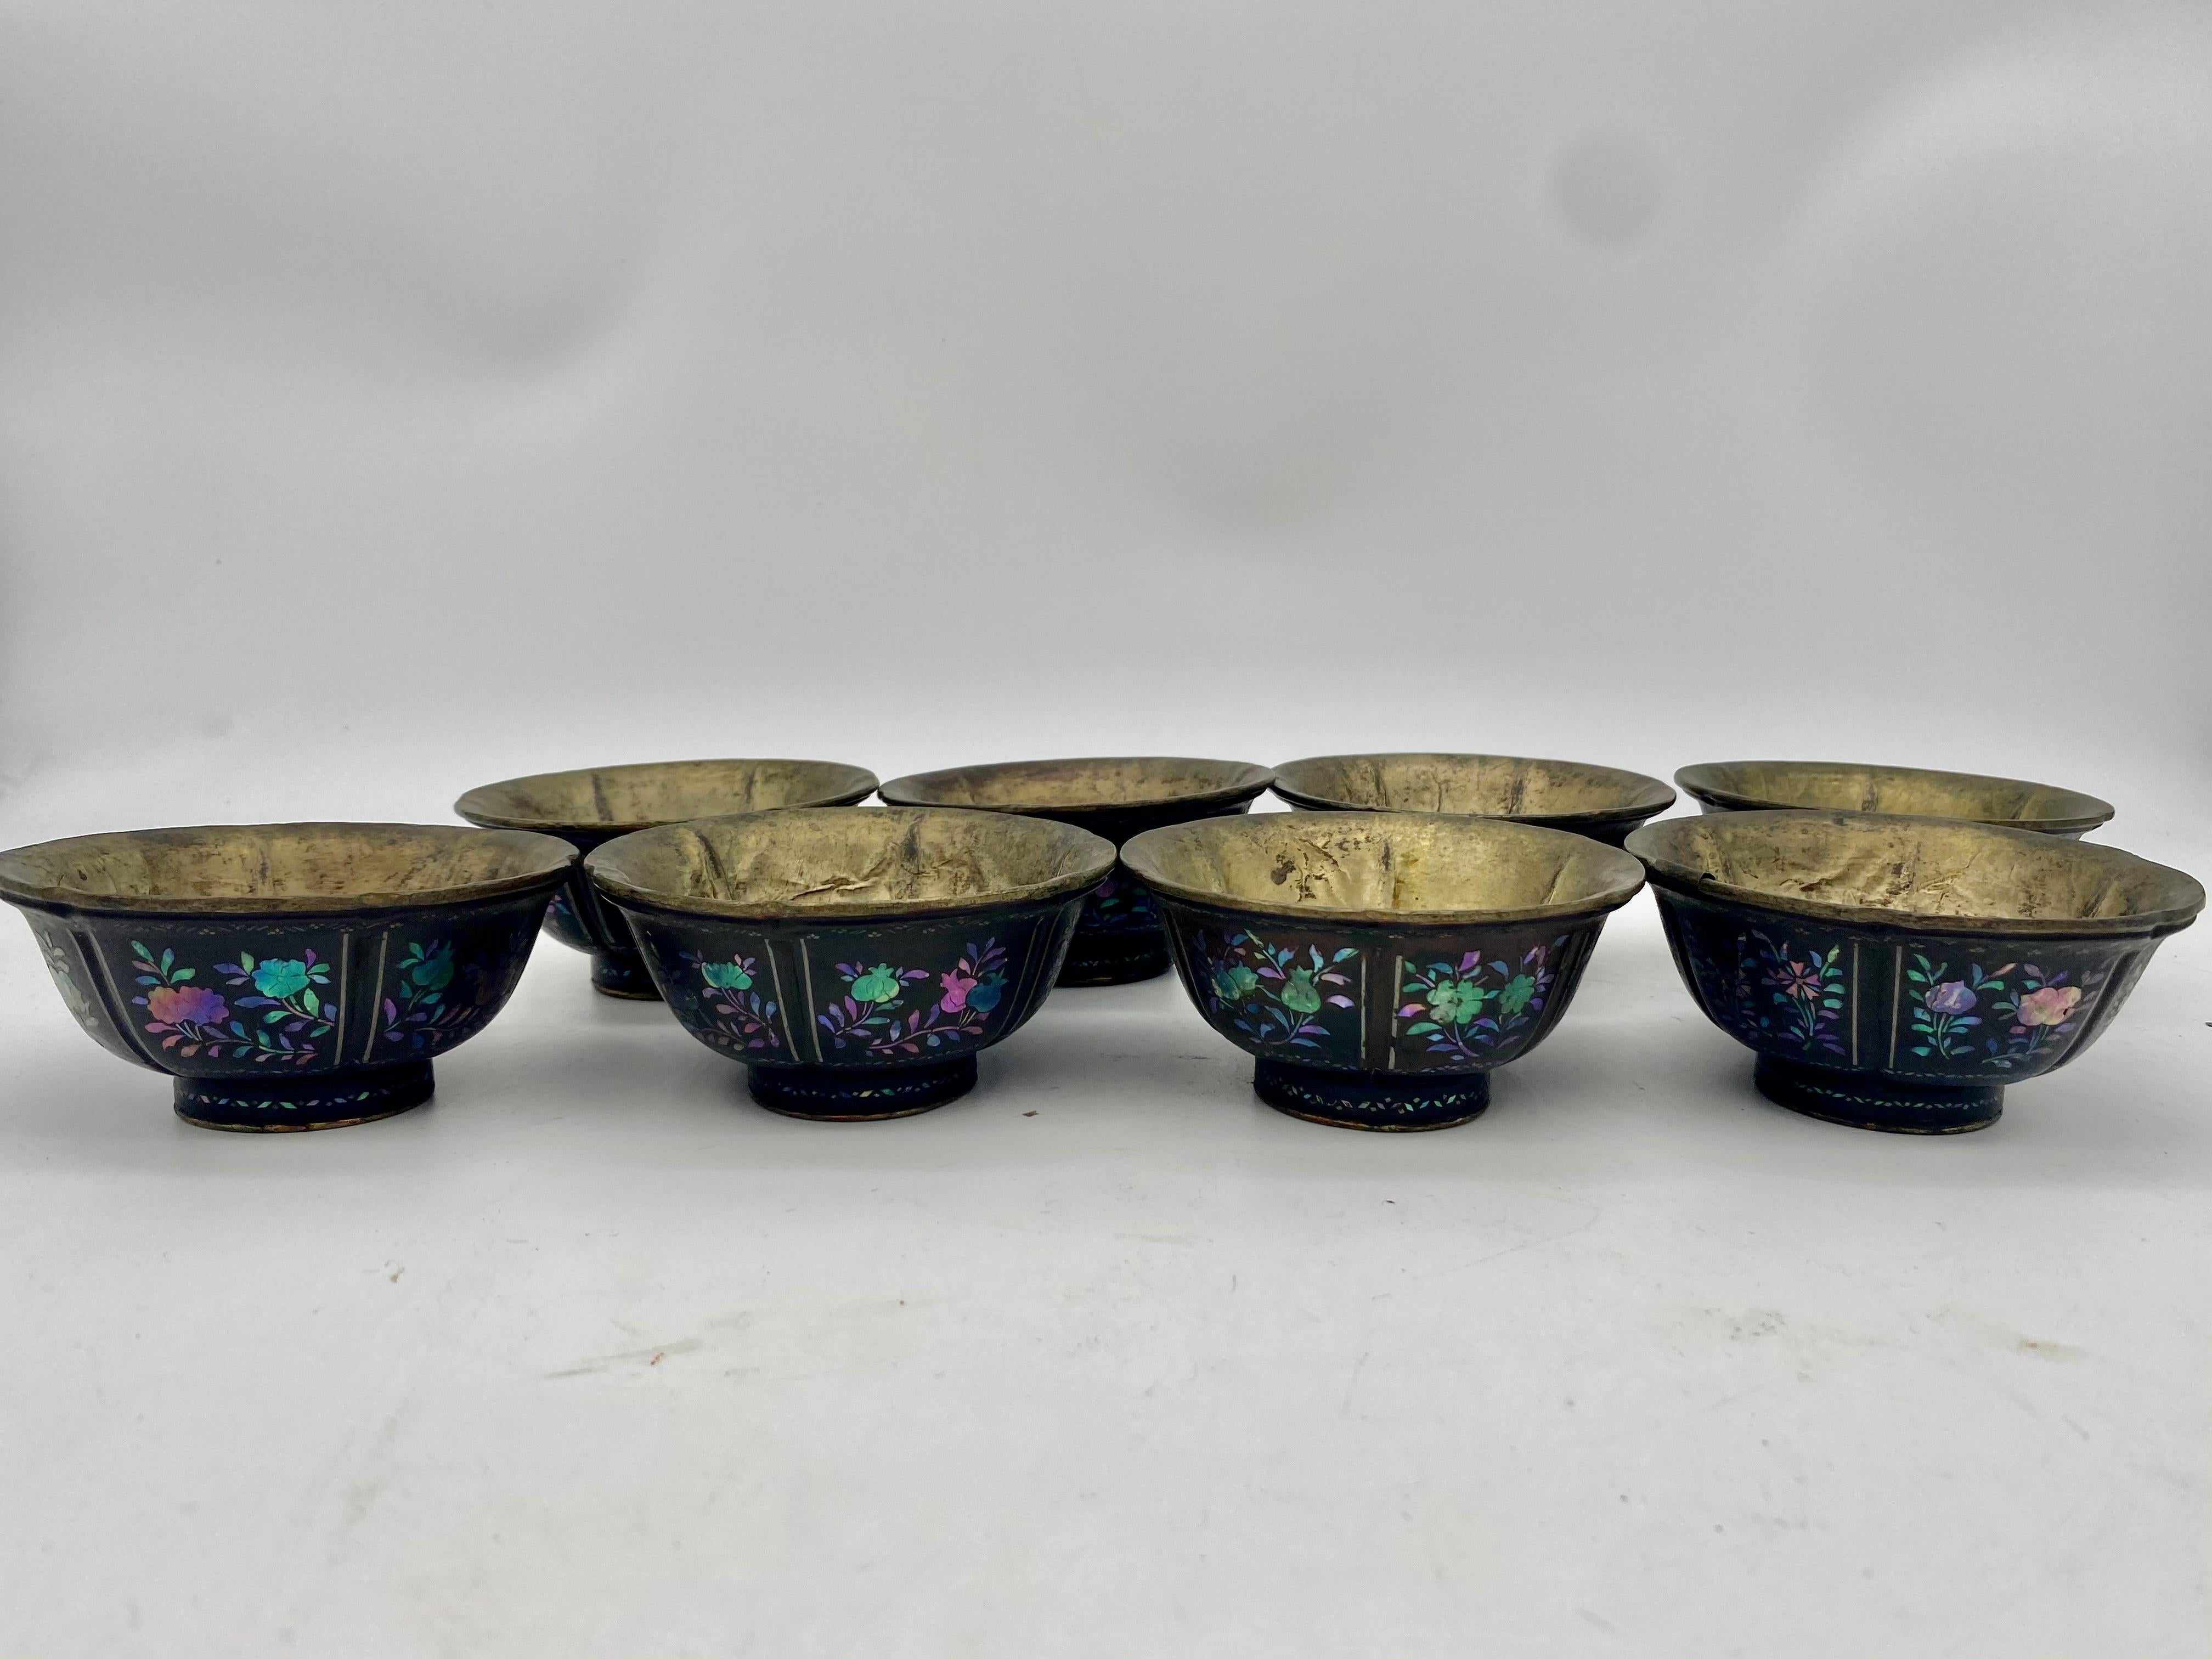 18th Century Set of 8 Chinese Silver Lacquer Bowls with Mother of Pearl Inlaid For Sale 8